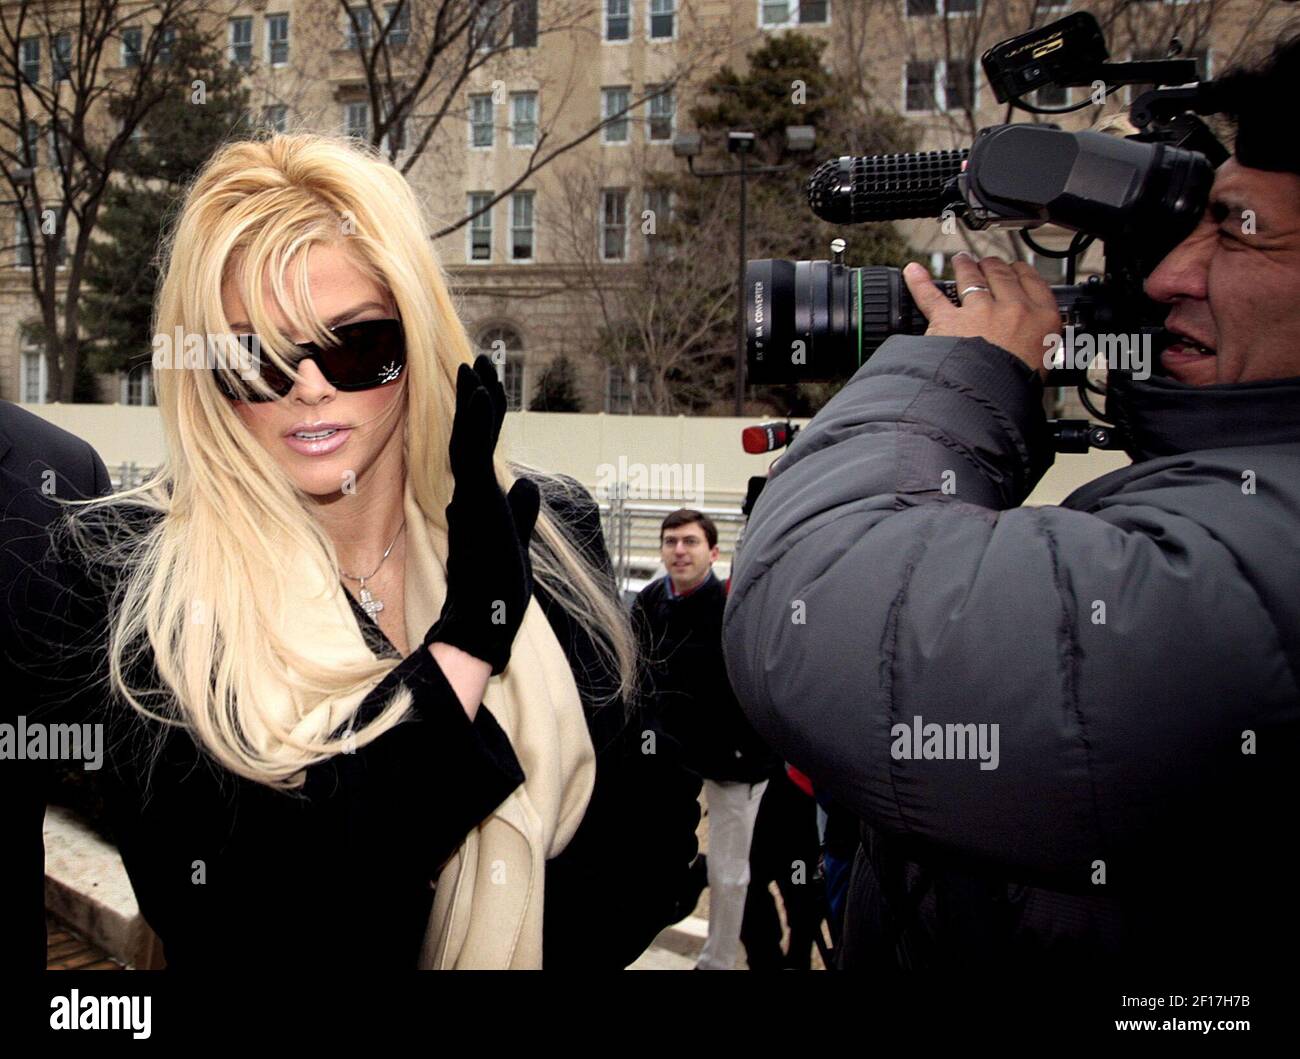 Anna Nicole Smith enters the side door of the U.S. Supreme Court Tuesday, February 28, 2006. Smith's case is to determine whether state or federal courts have jurisdiction over her claim for money from the estate of her late husband, J. Howard Marshall, II. (Photo by Chuck Kennedy/KRT) Stock Photo